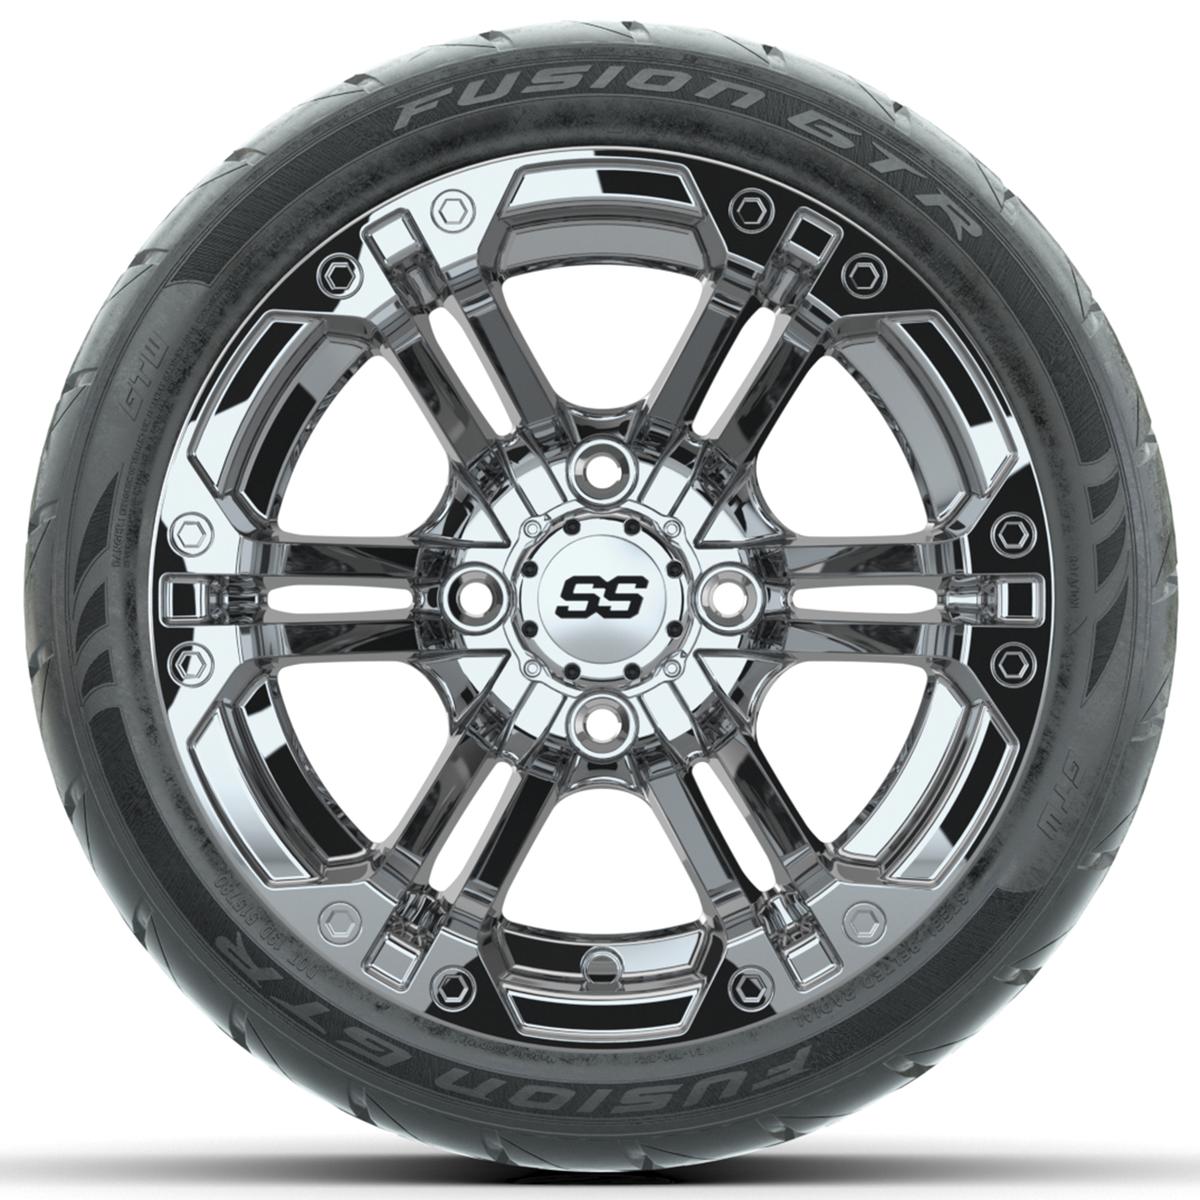 Set of (4) 12 in GTW Specter Wheels with 215/40-R12 Fusion GTR Street Tires